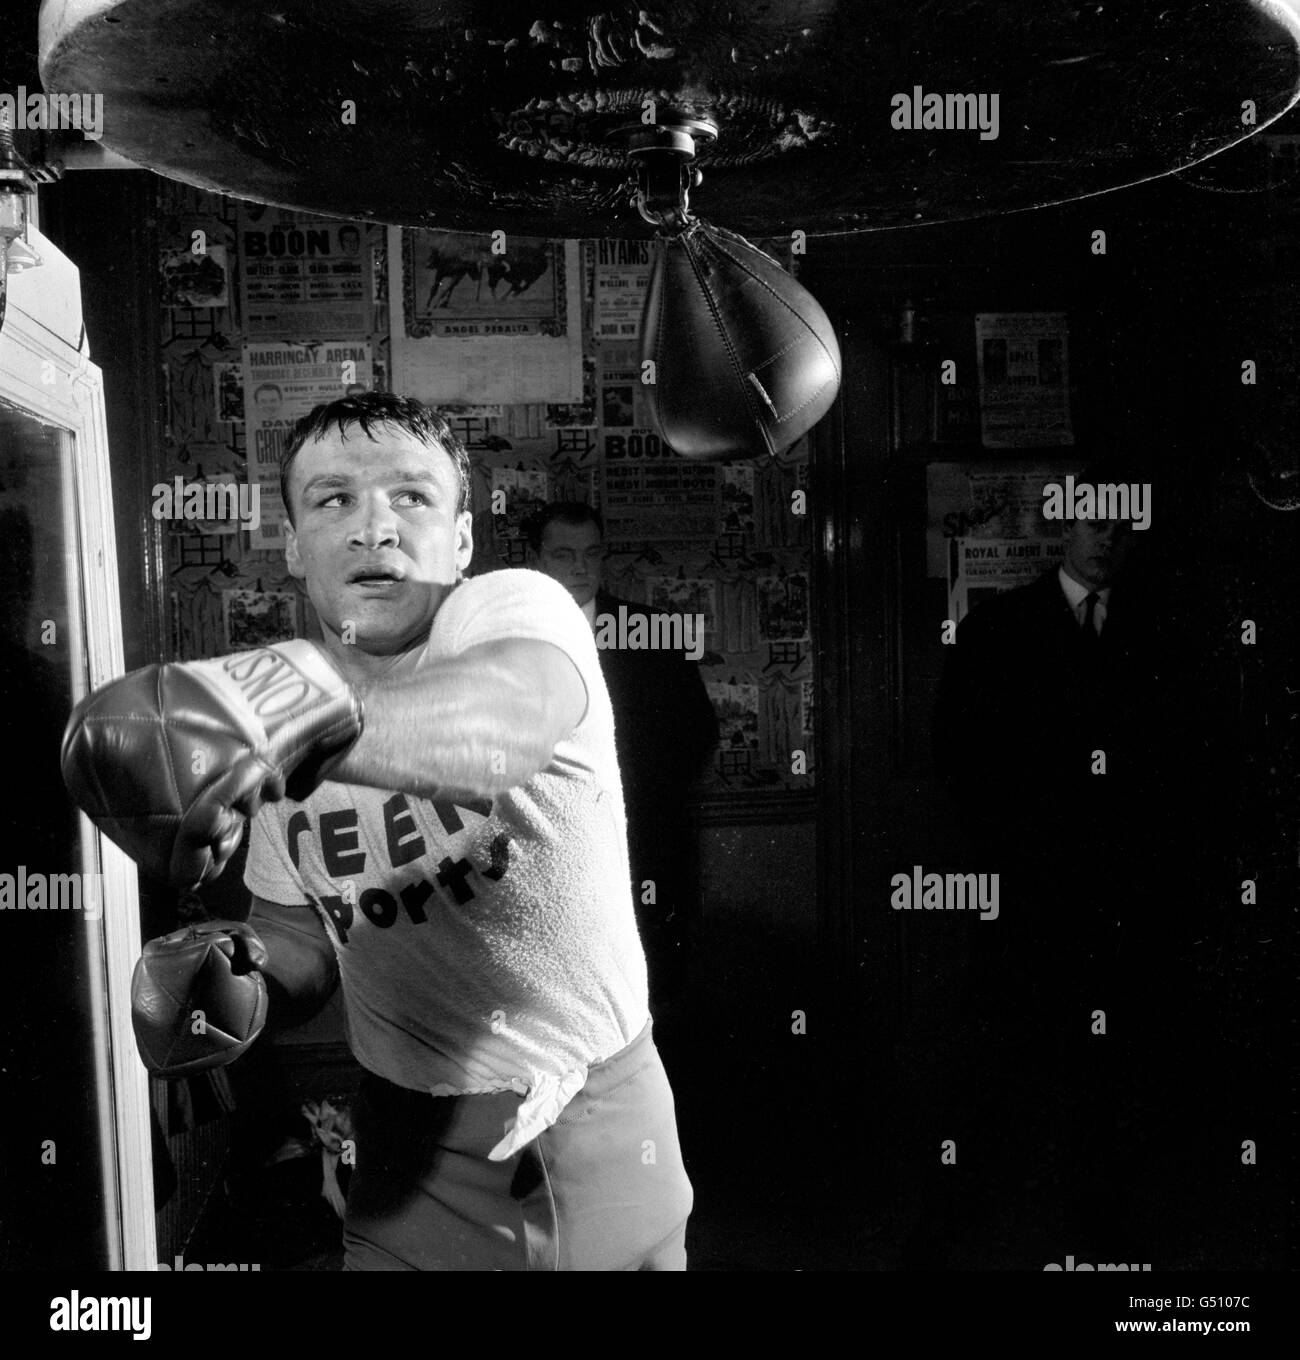 Boxe - Dave Charnley Formation - Thomas Becket un gymnase, Londres Banque D'Images